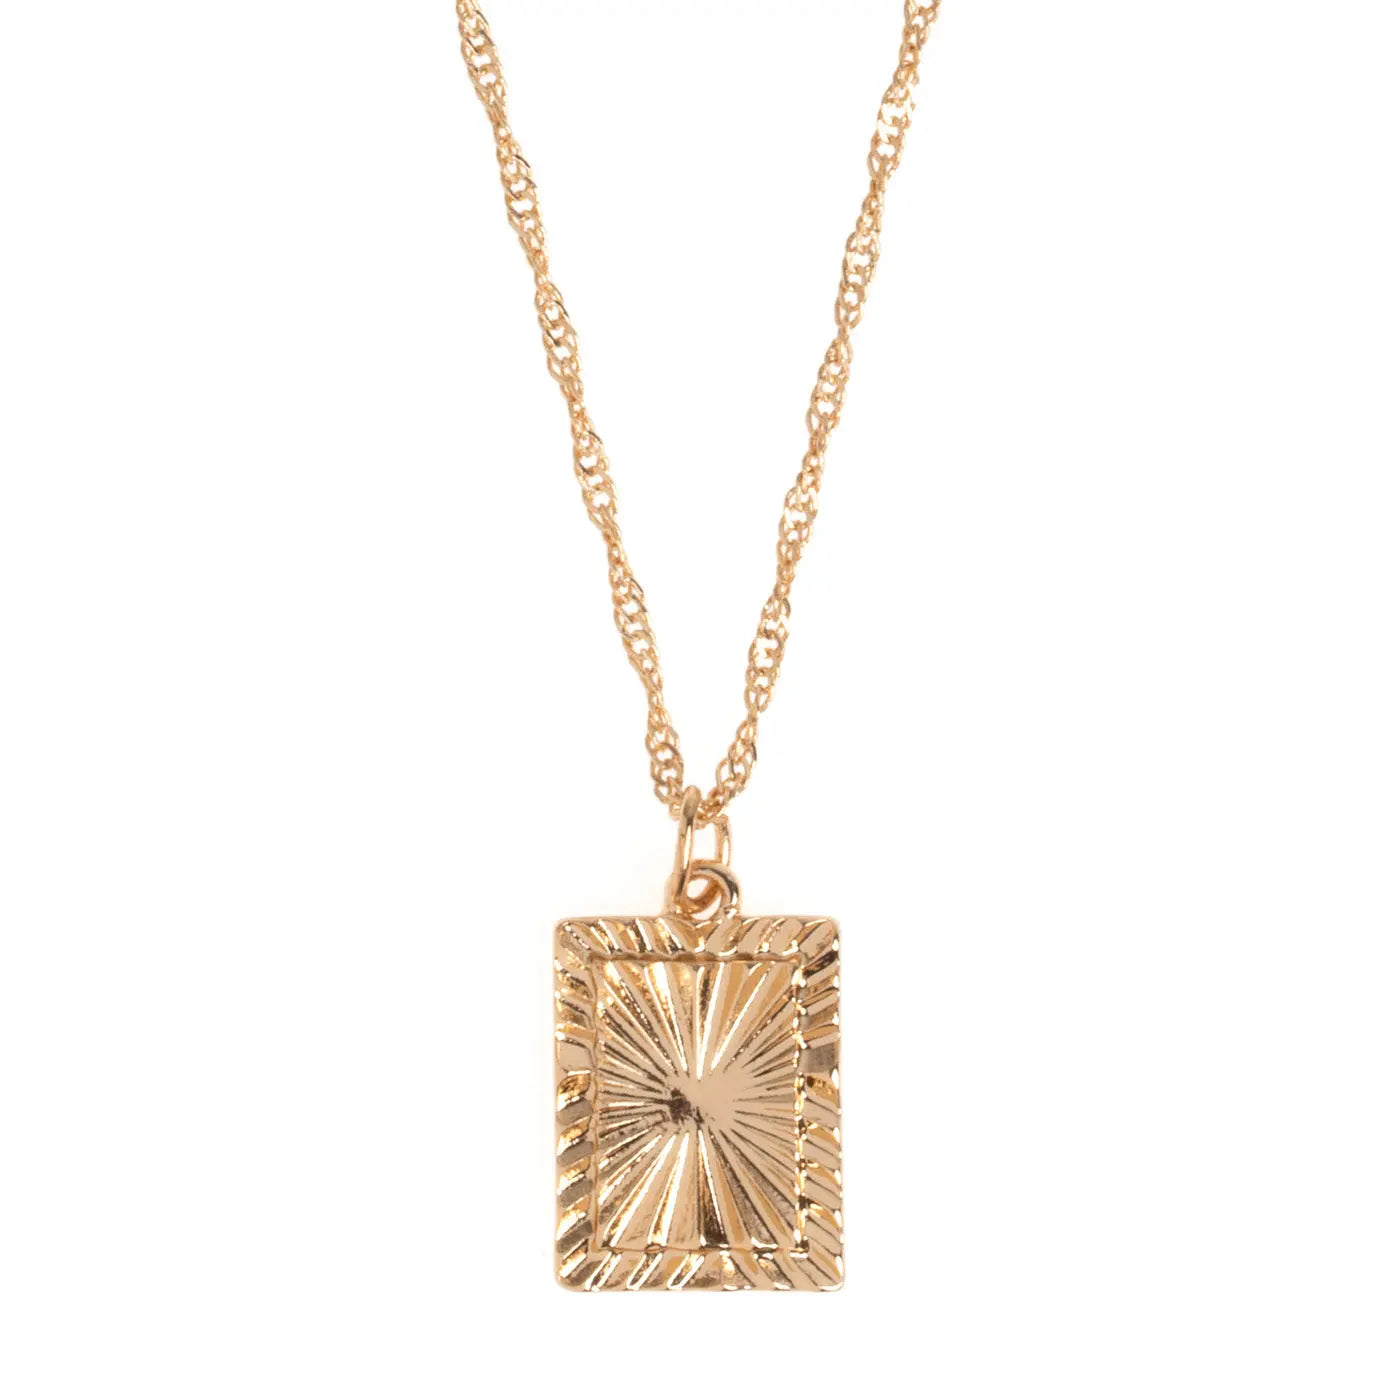 Lana - Rays Square Plate Necklace